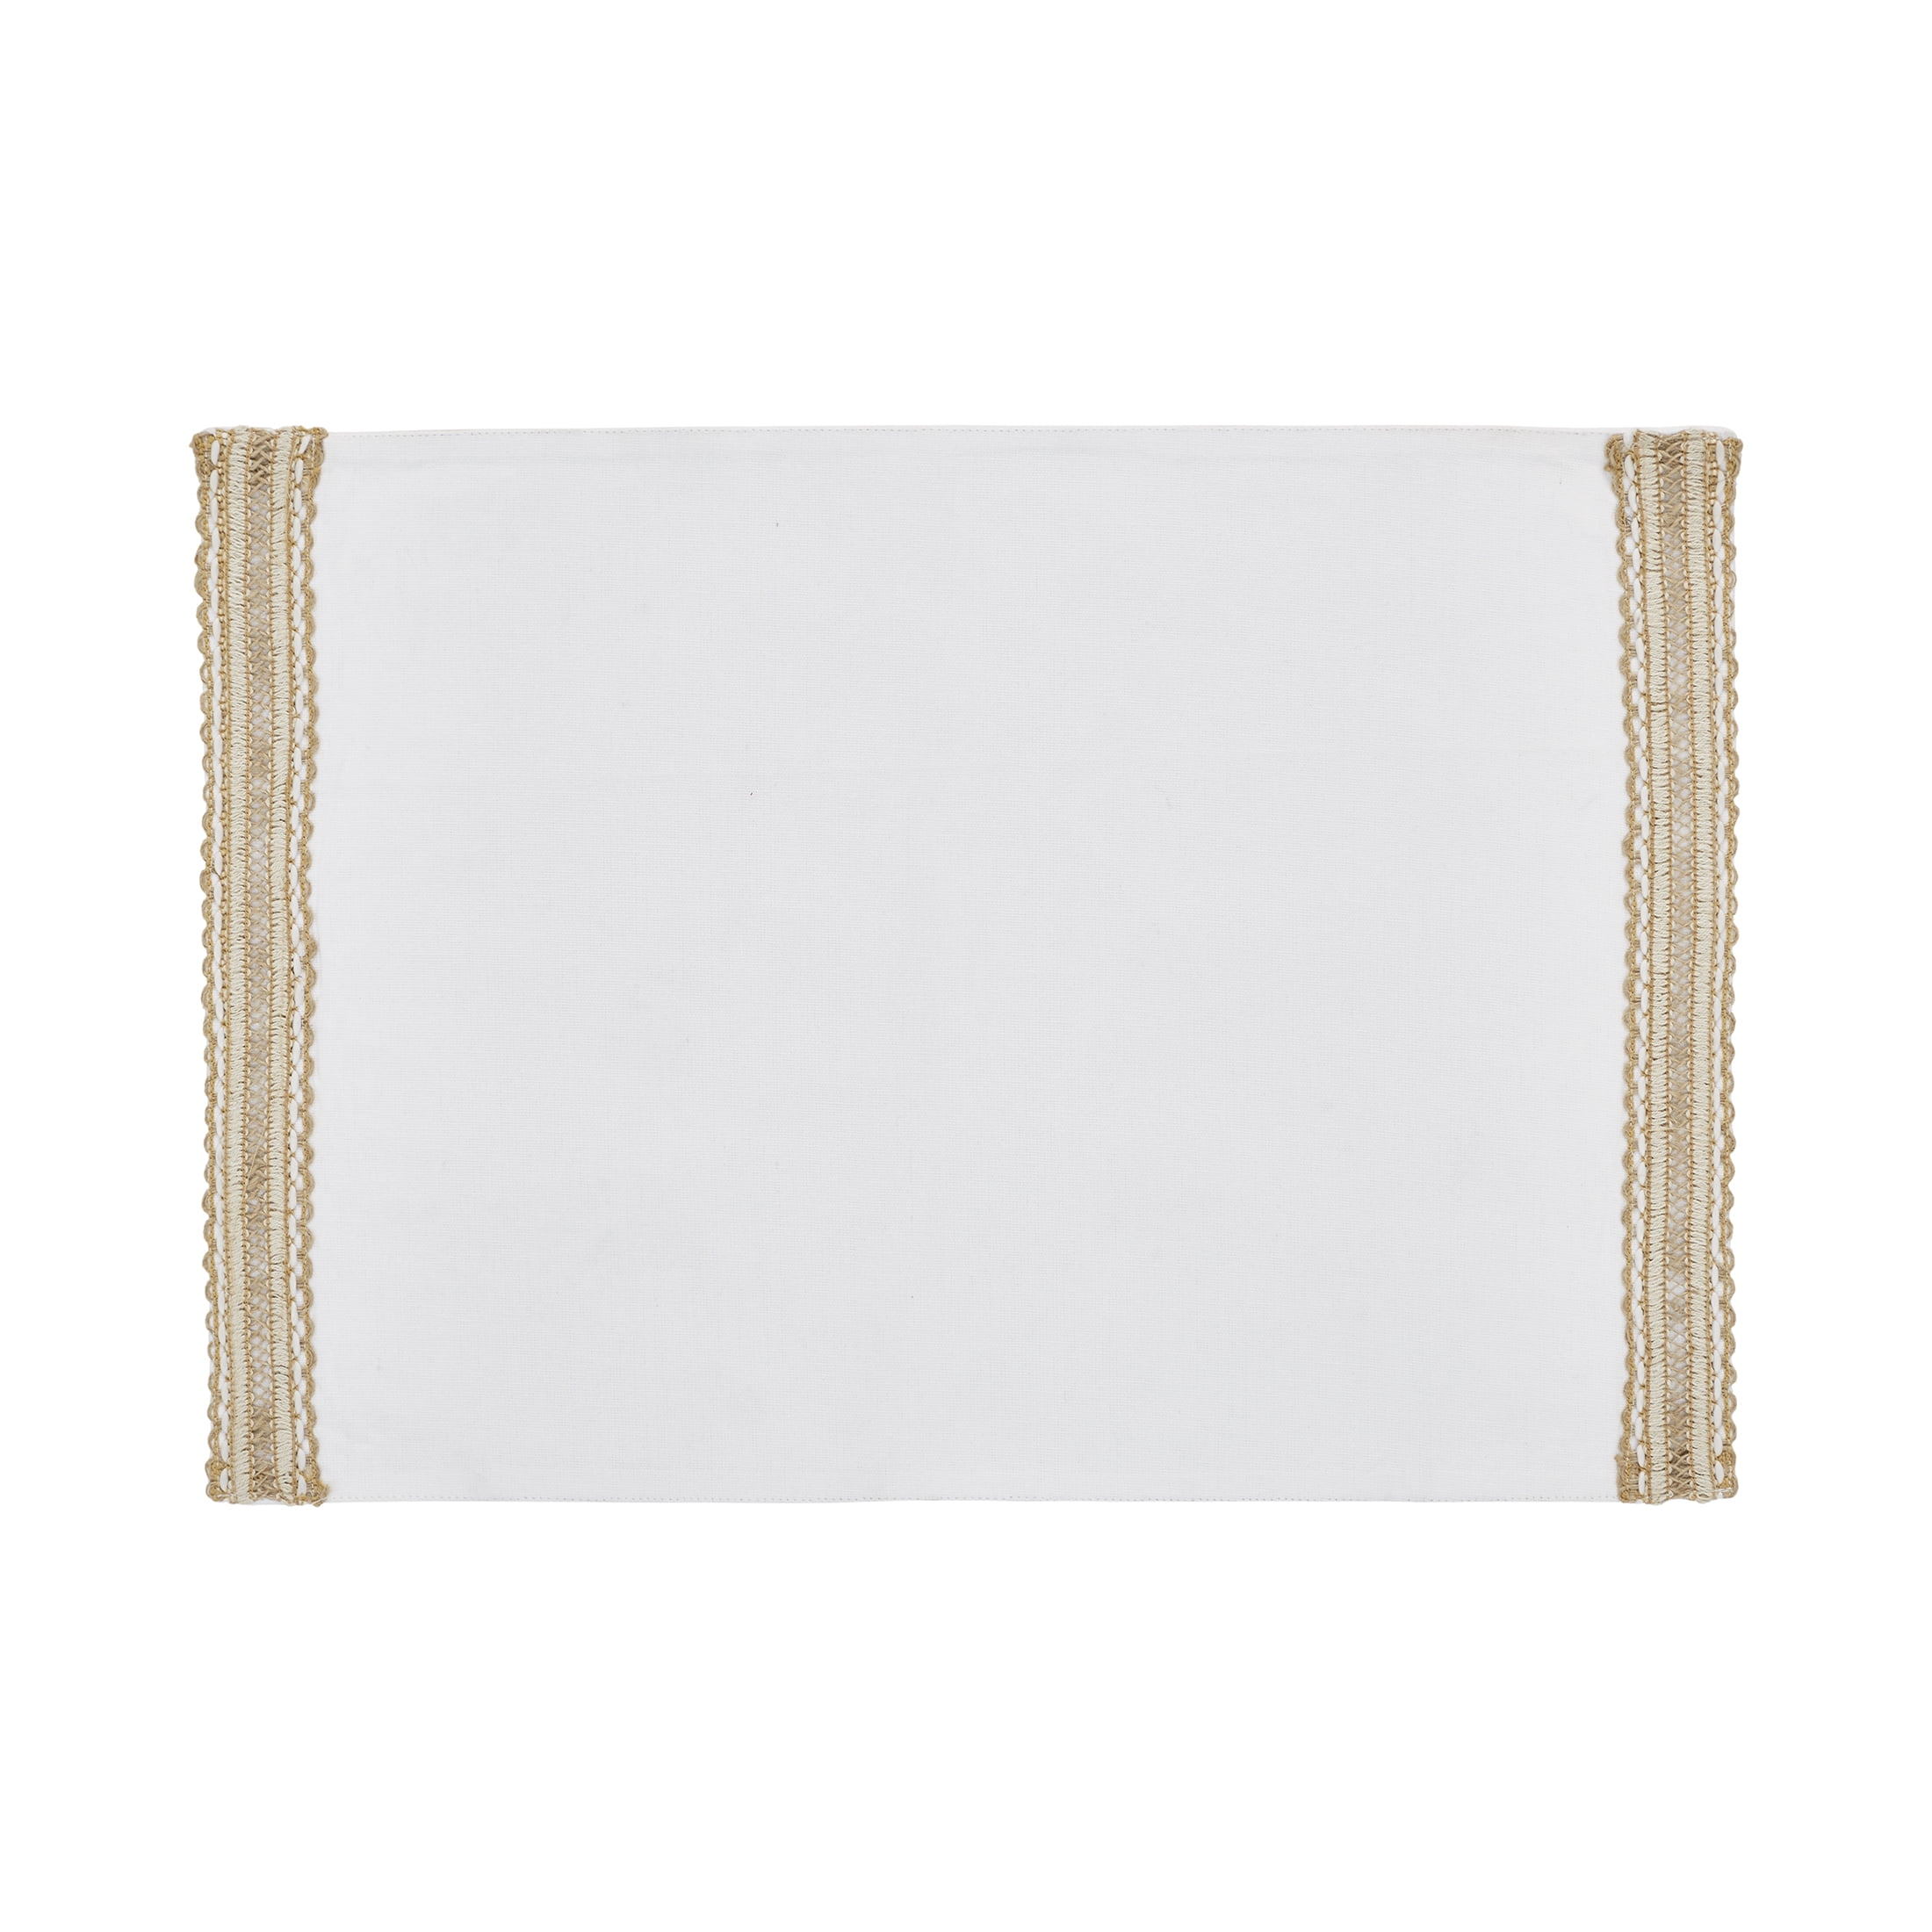 My Texas House Declan Jute Trim 14" x 20" Table Placemat, Natural White, 1 Piece